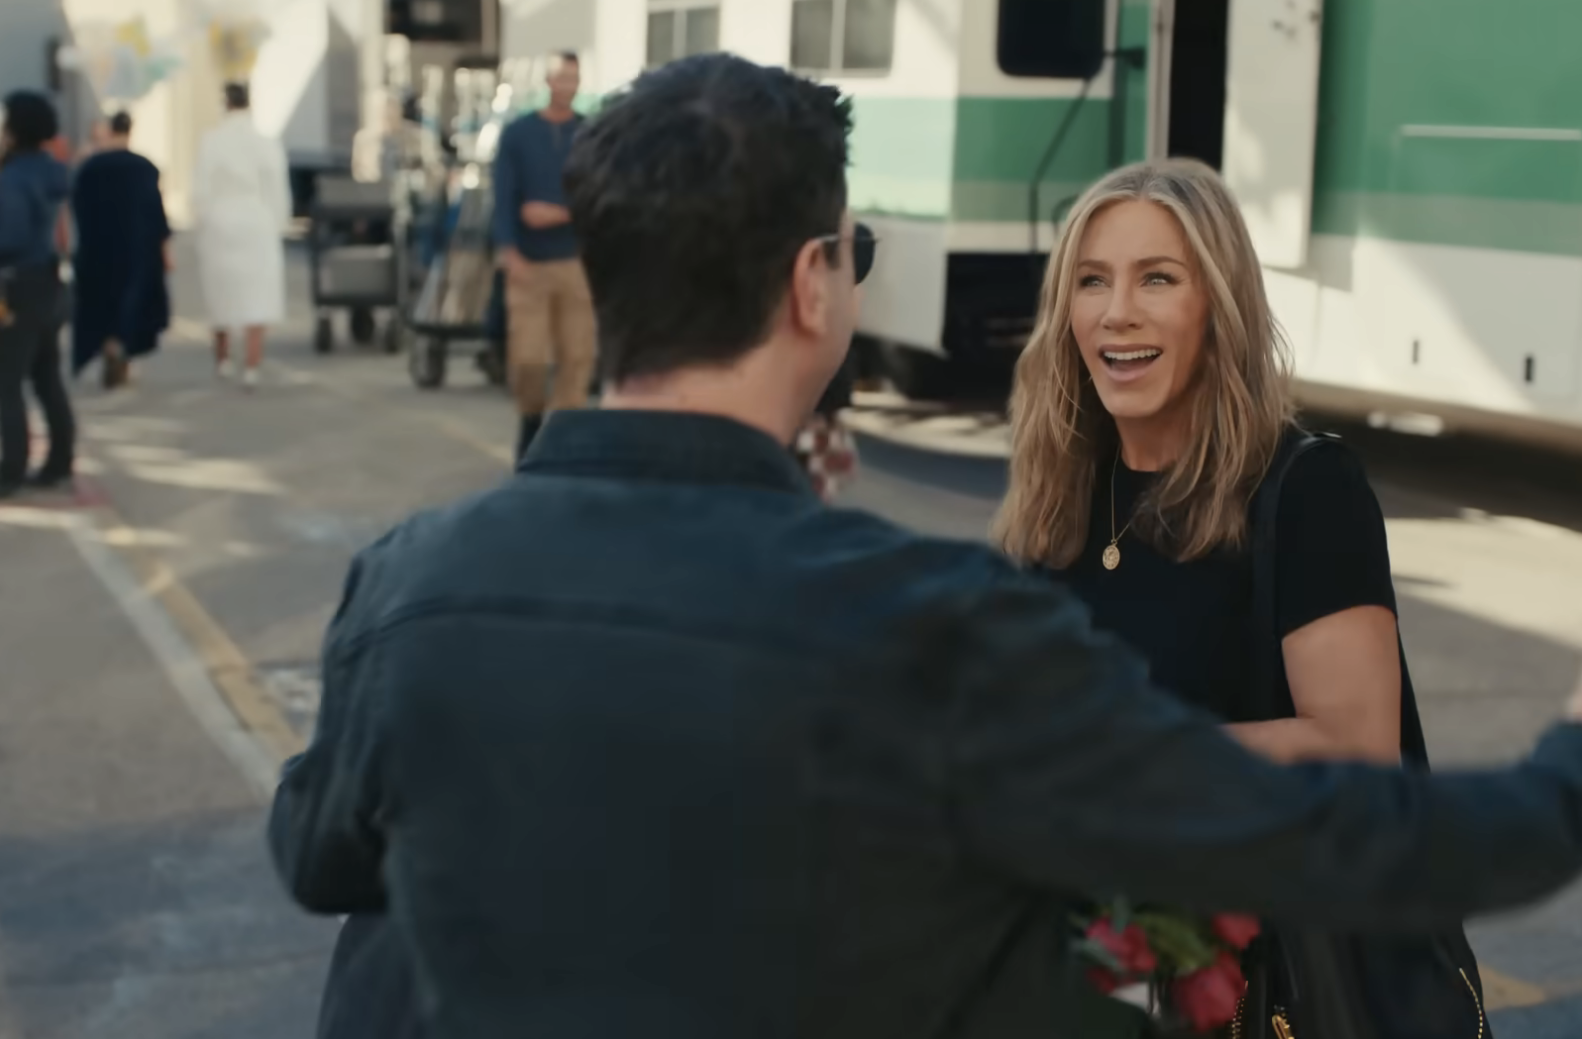 Jennifer smiling but clearly not knowing who David is in a scene from the? Uber Eats commercial